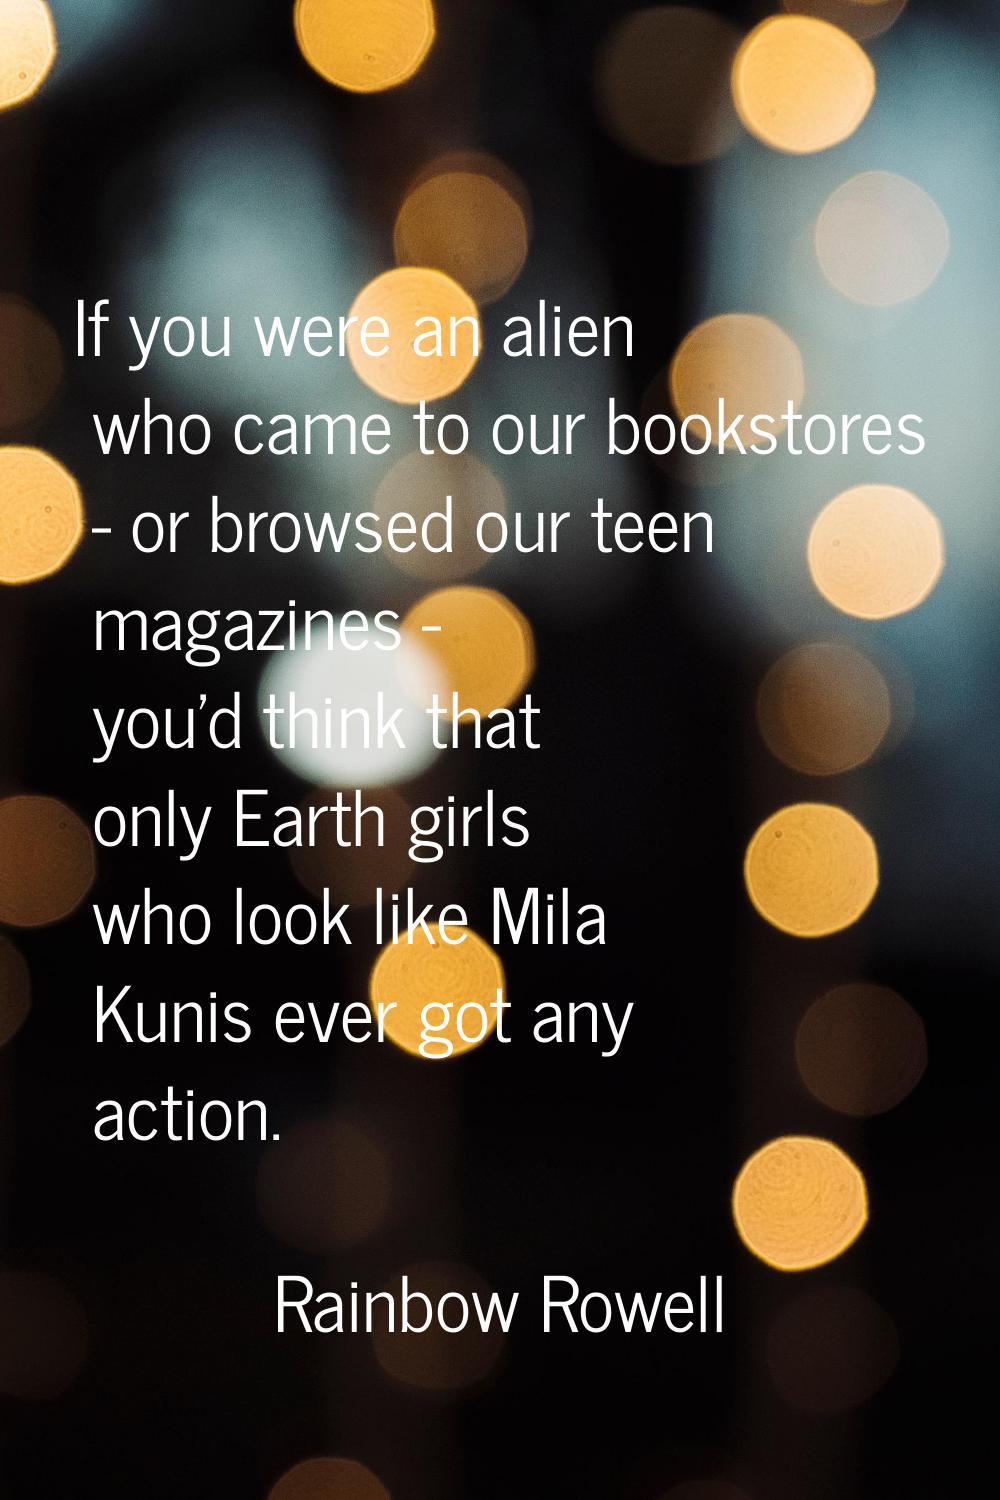 If you were an alien who came to our bookstores - or browsed our teen magazines - you'd think that 